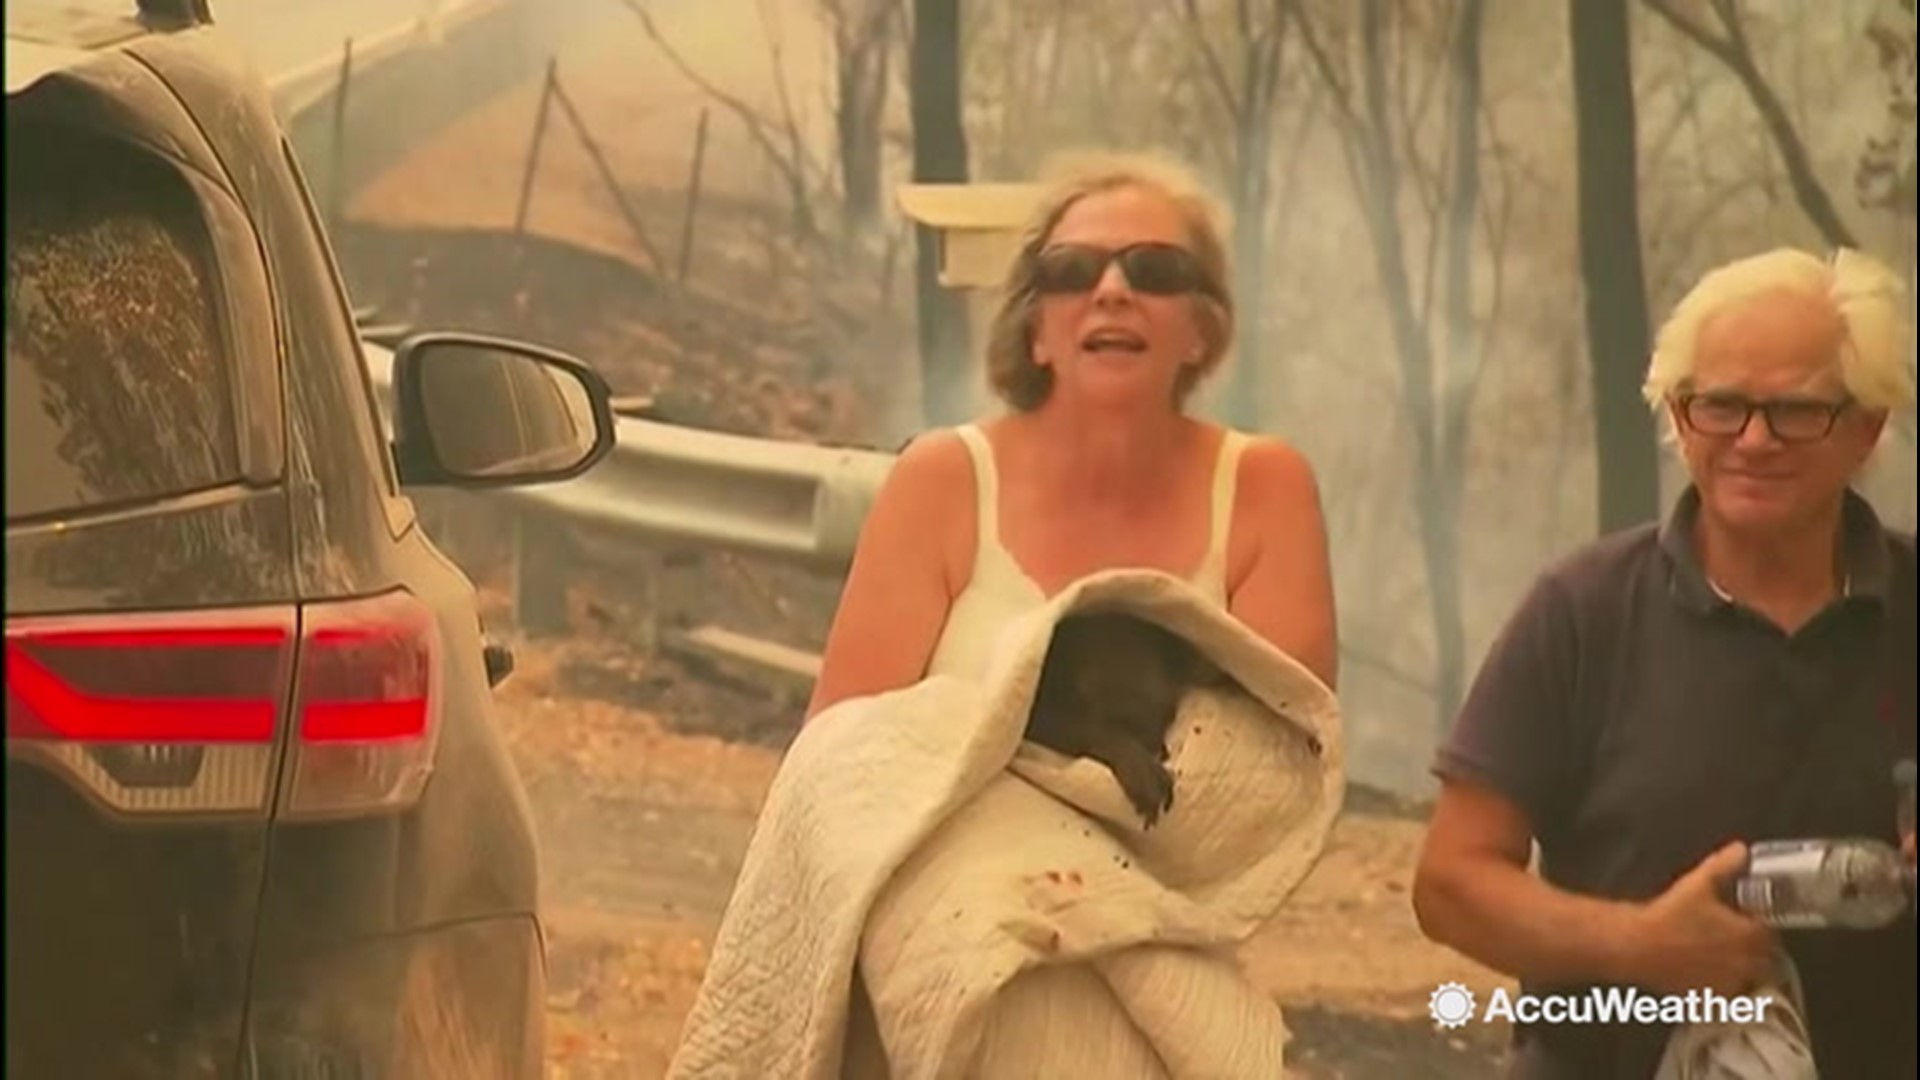 A heroic woman rescued a badly burnt and wailing koala from an Australian bushfire on Tuesday, Nov. 19. The country's koala populations have been a major victim of the flames, with more than 350 of the marsupials feared killed in a major habitat.